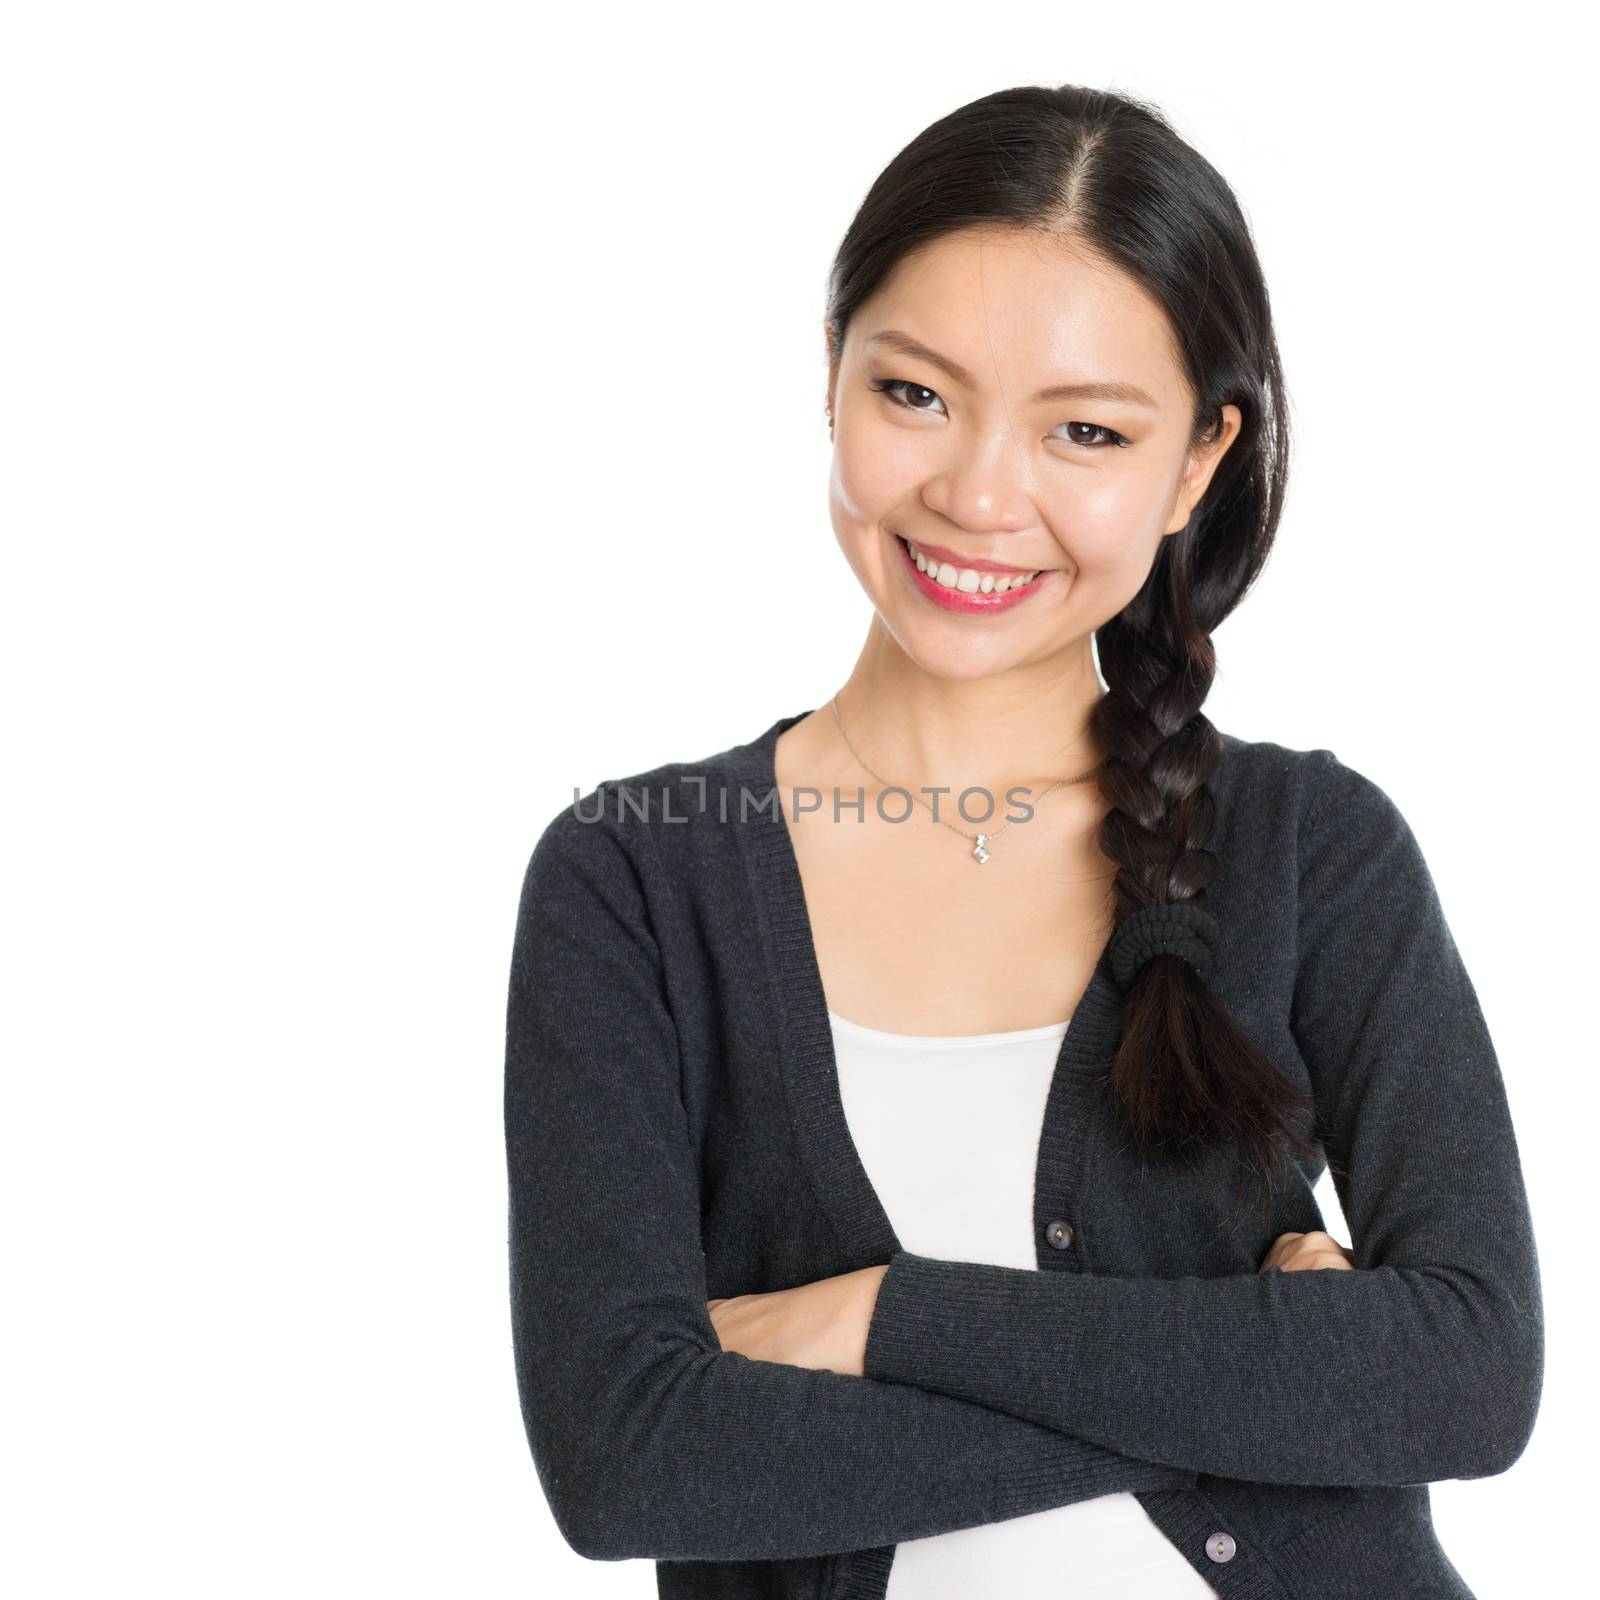 Portrait of young Asian female with braid hair, arms crossed and smiling, isolated on white background.